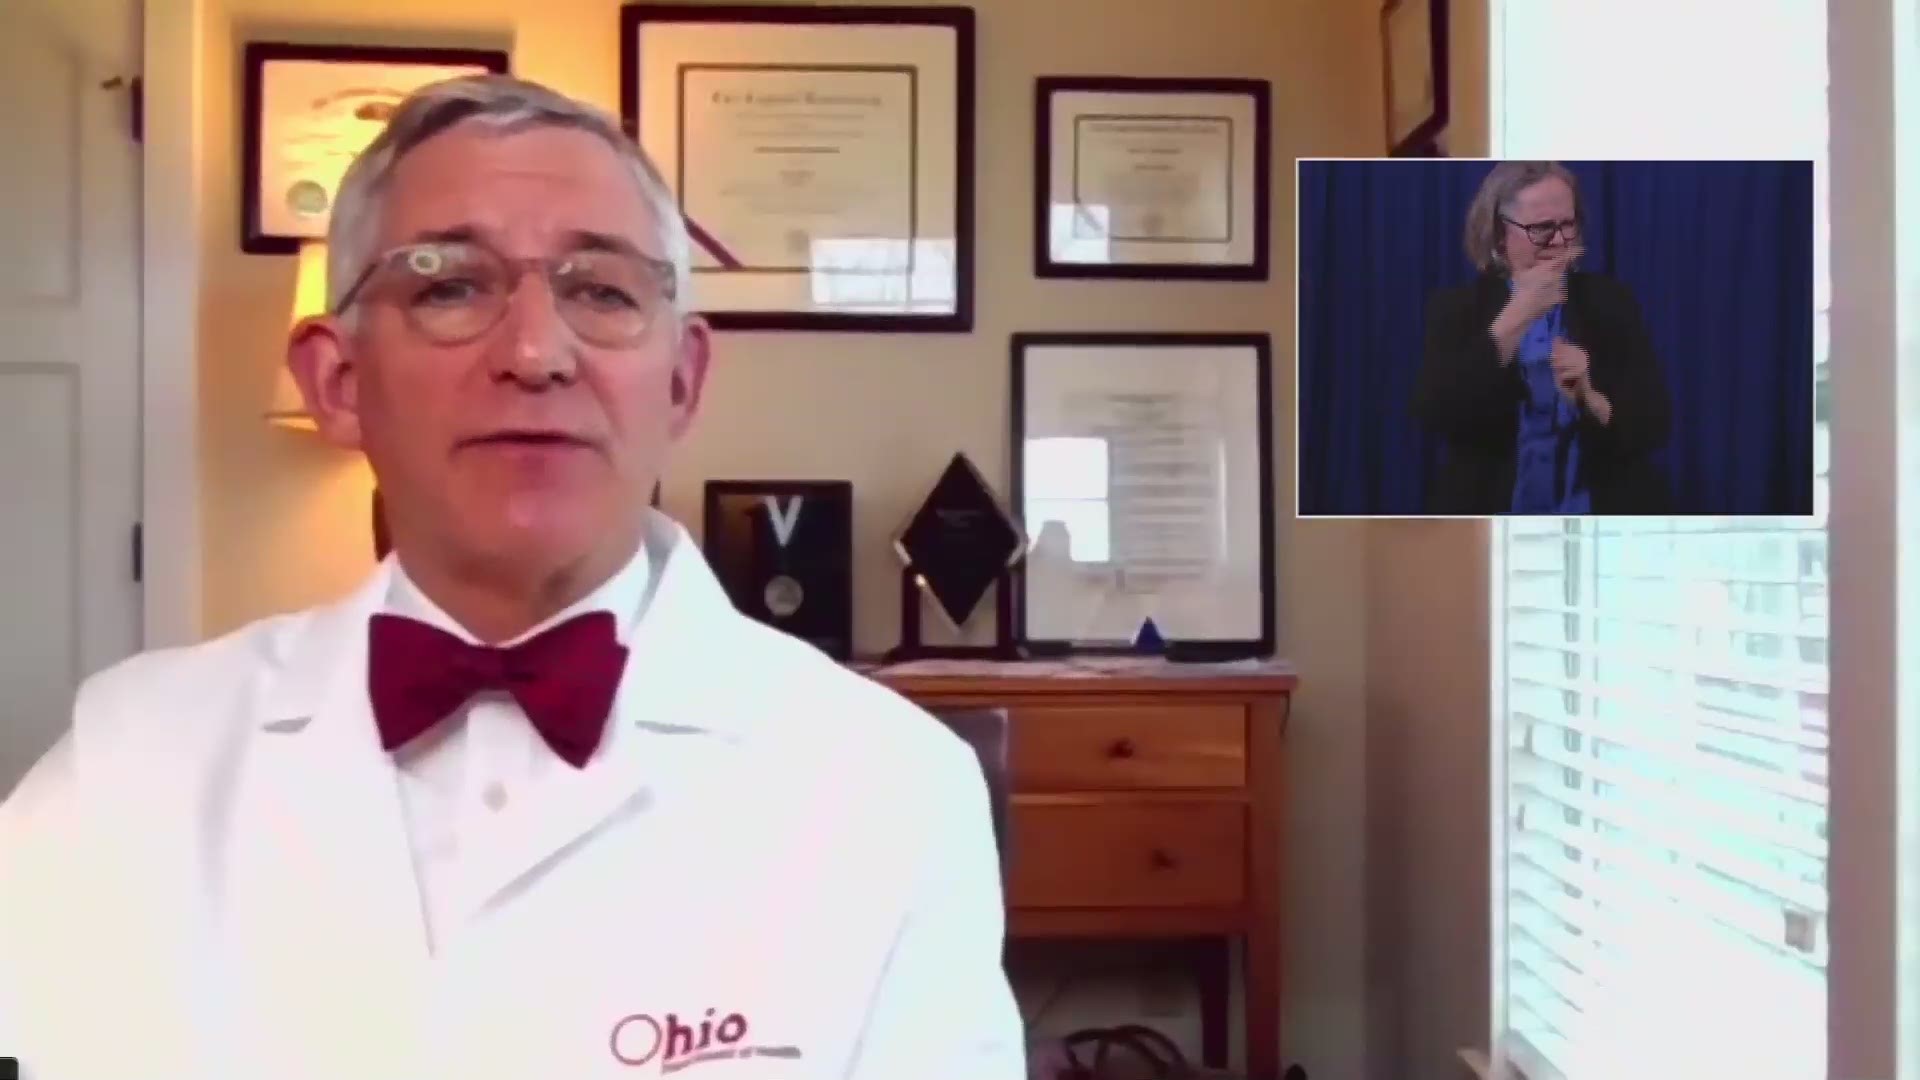 The latest on the new UK virus. Ohio Chief Medical Officer Dr. Bruce Vanderhoff discussed the new COVID-19 variant at Gov. Mike DeWine's press briefing on Tuesday.